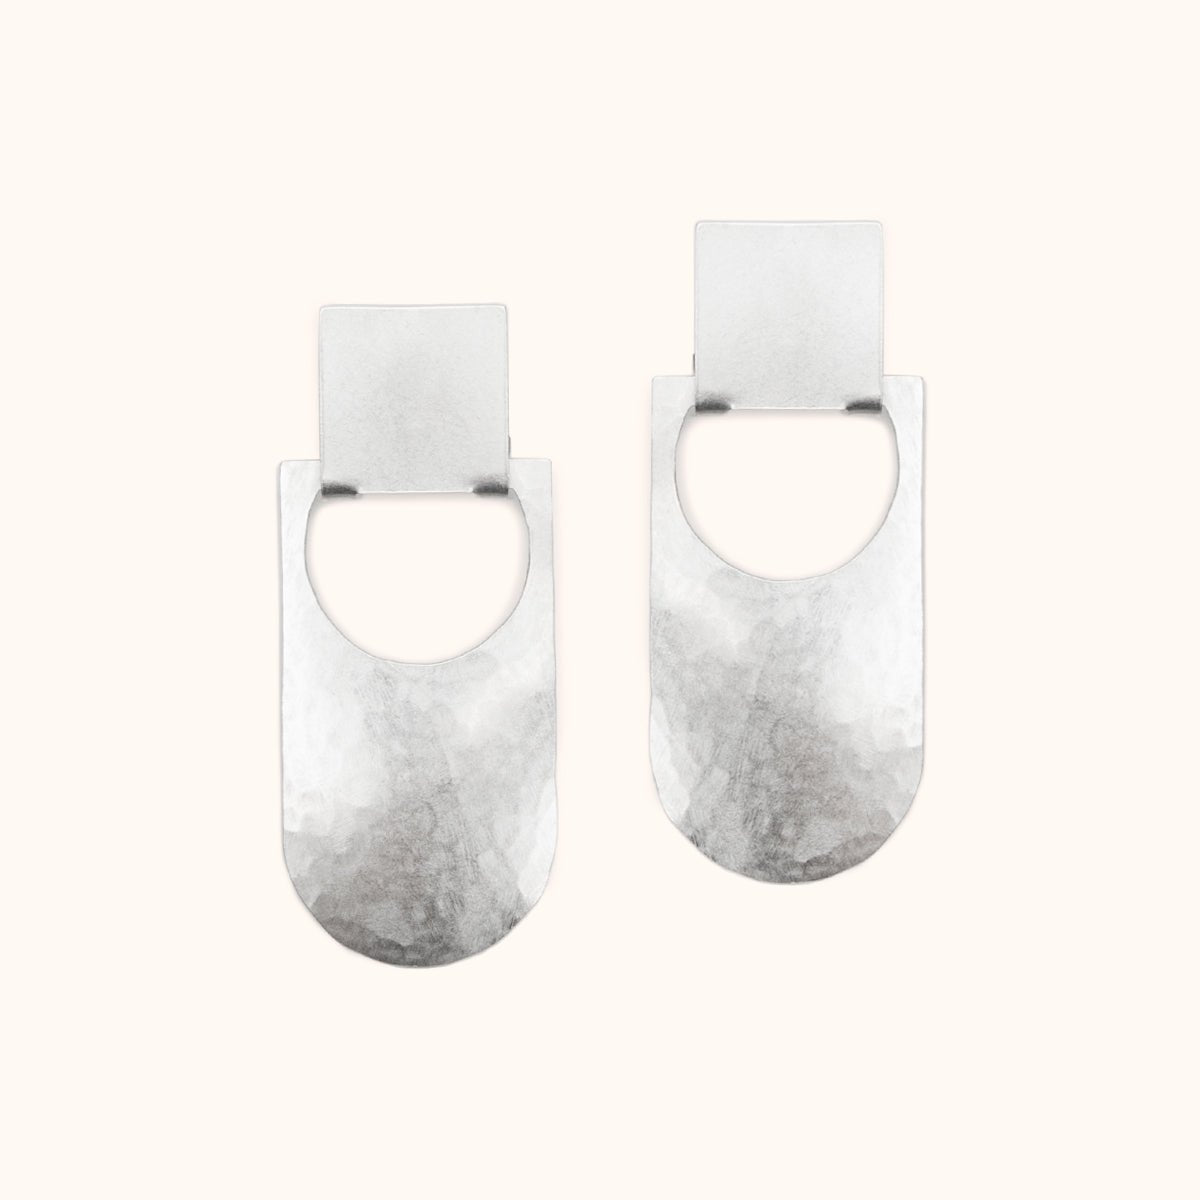 An elongated curved earring with a circular cut out that hangs from a square stud earring. Made in solid sterling silver and finished with a hammered texture. The Botao Earrings are designed and handcrafted in Portland, Oregon.